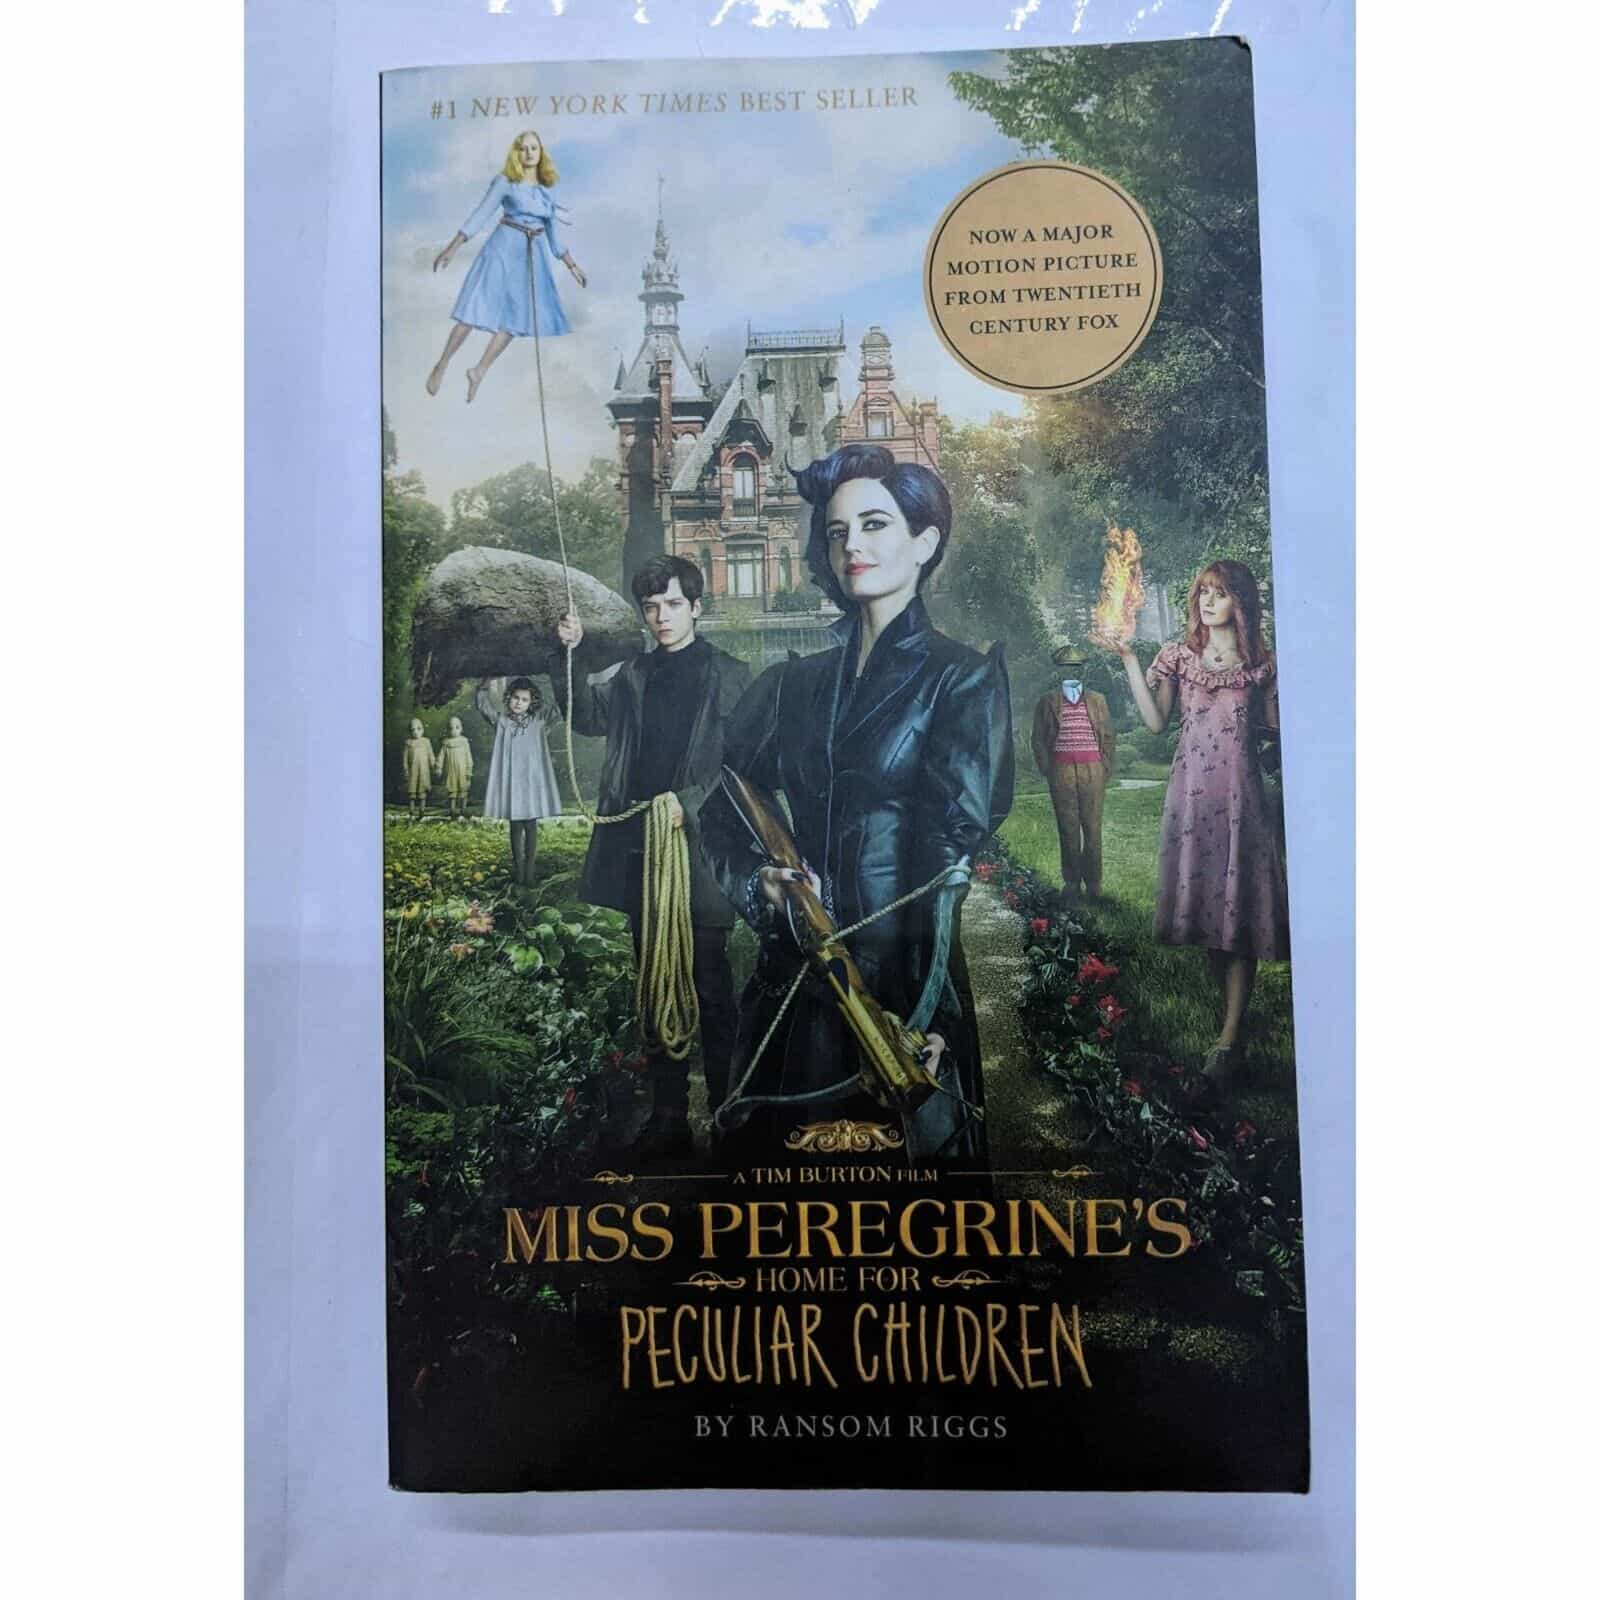 Miss Peregrine’s Home For Peculiar Children by Ransom Riggs Book